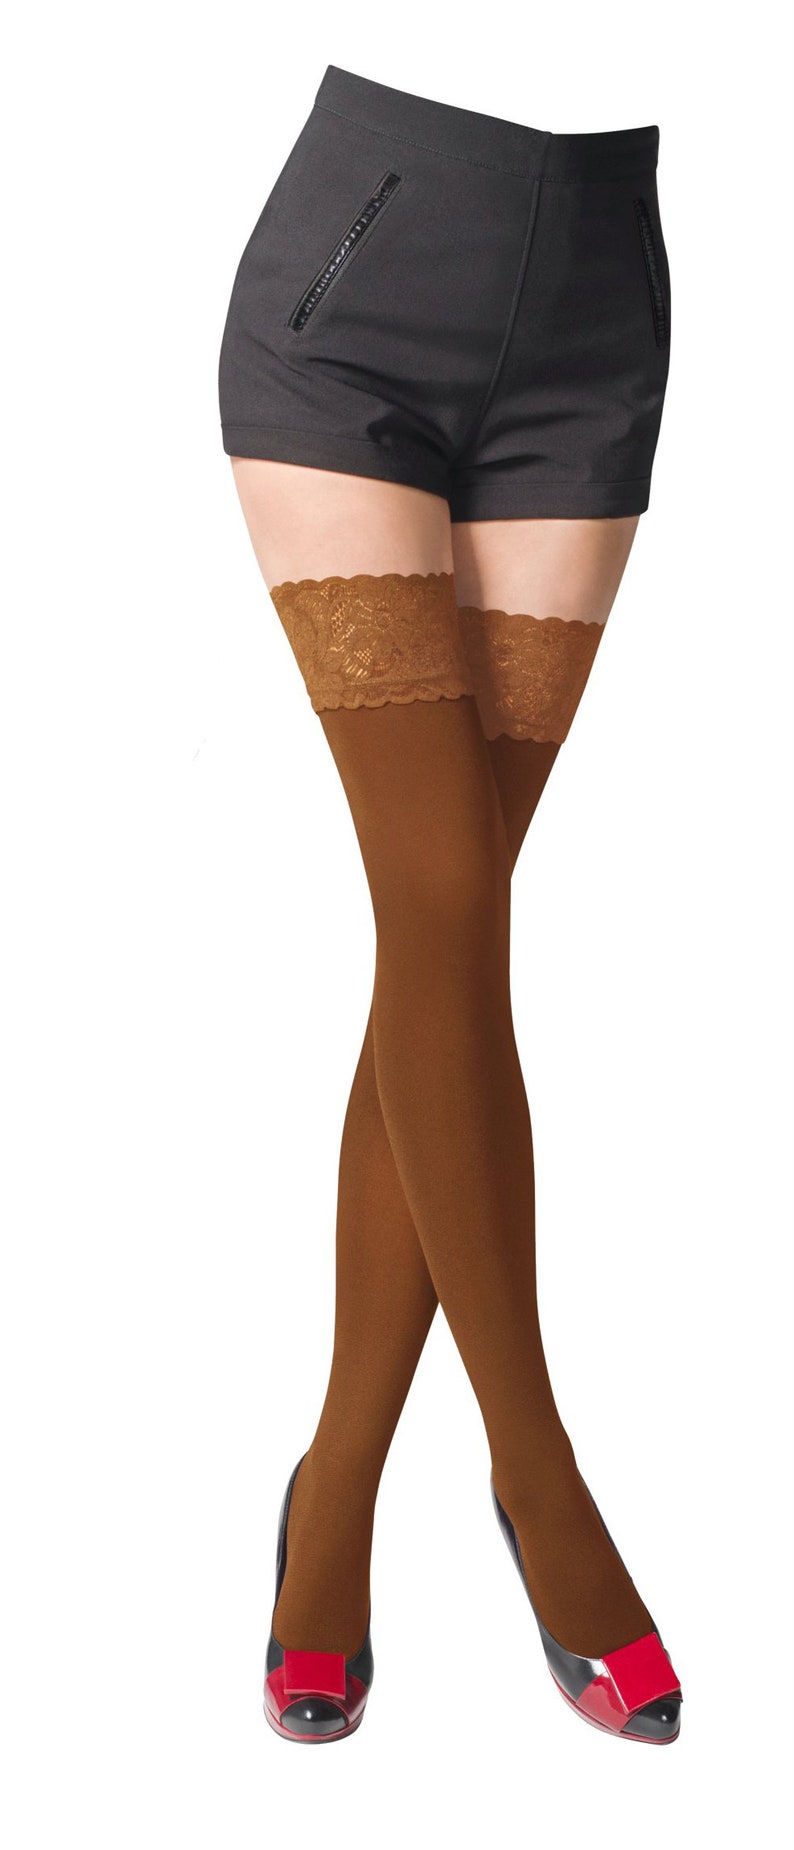 NEW Lace Top 80 Denier Sheer Hold-Ups Stockings by Sentelegri ,9 Various Colours Sizes S-XL Beige